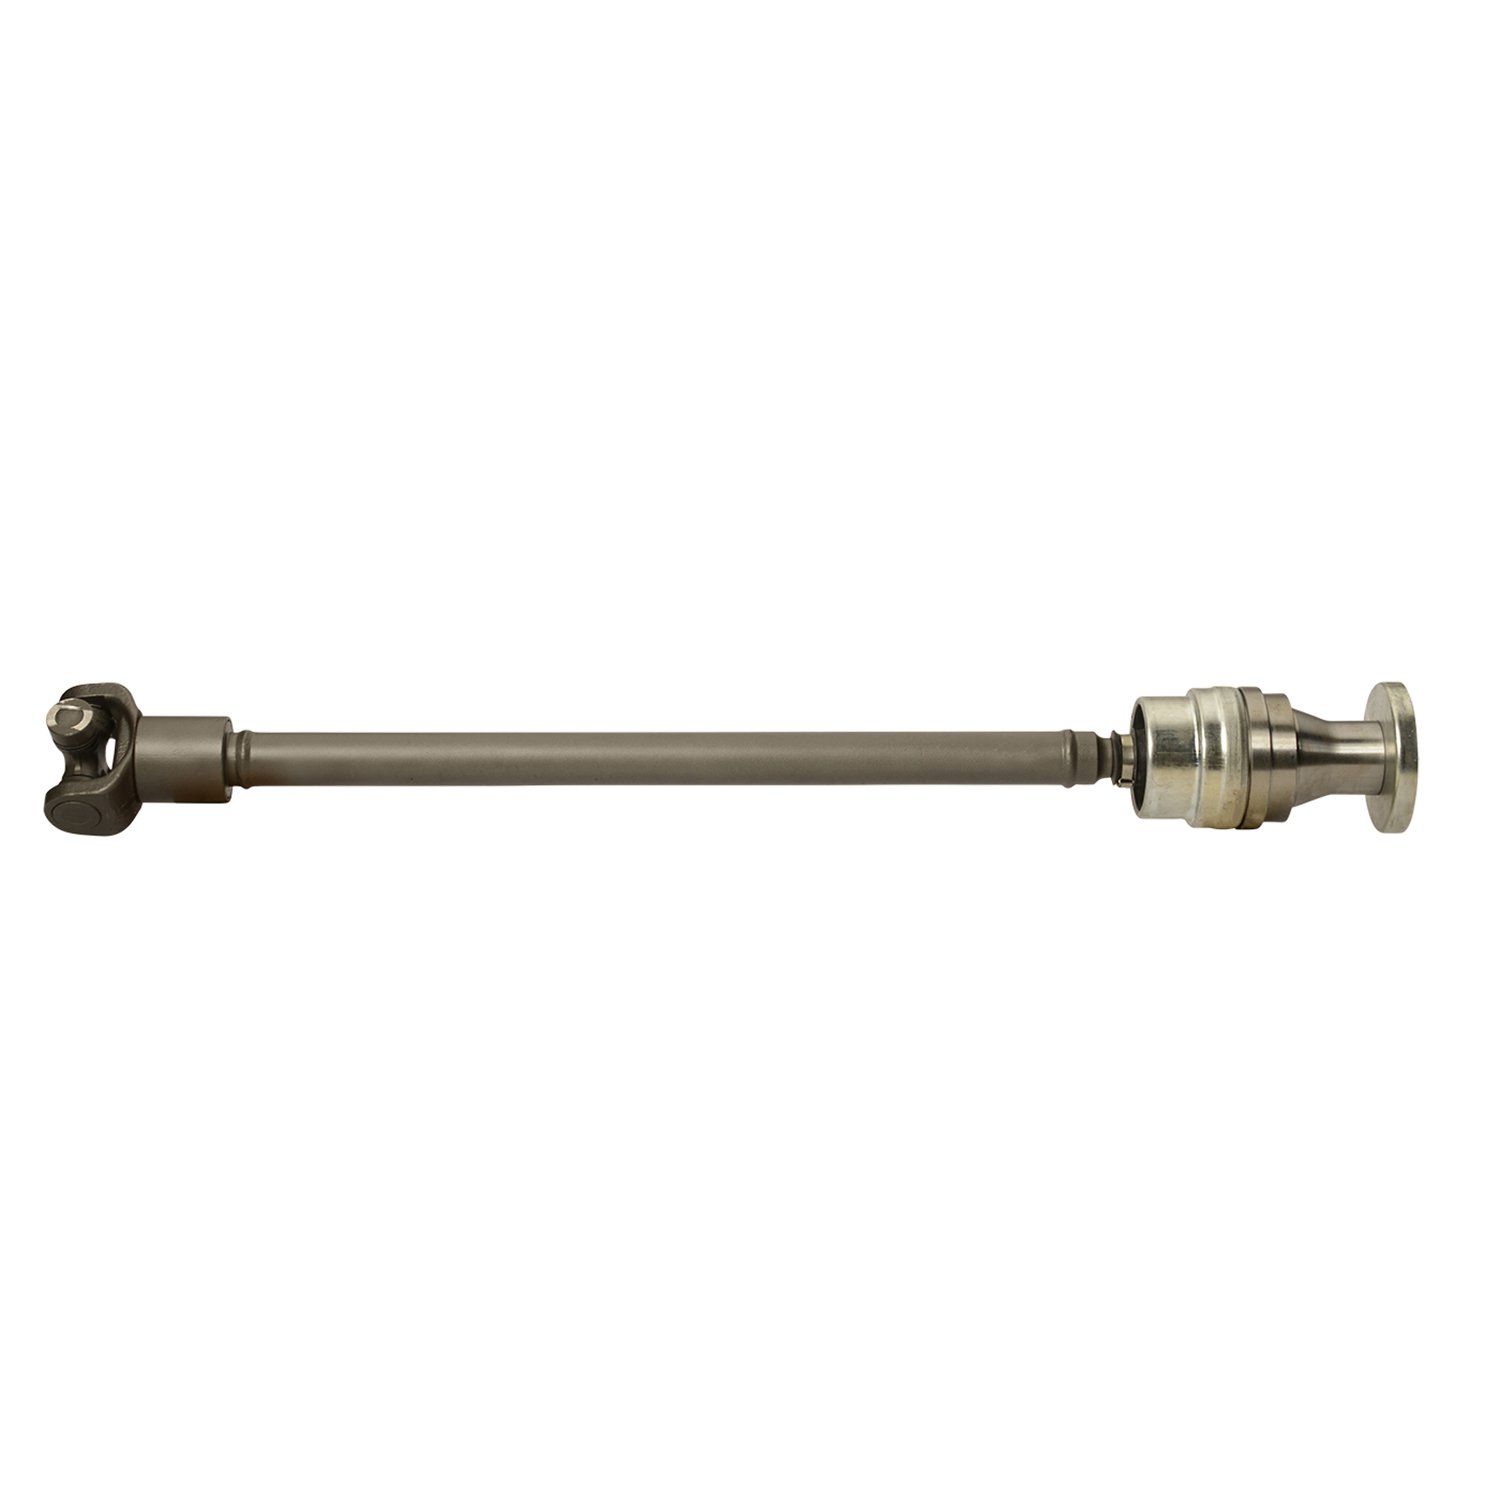 USA Standard ZDS9332 Front Driveshaft GM & Olds Midsize Truck/Suv, 19.25 in. Weld-To-Weld